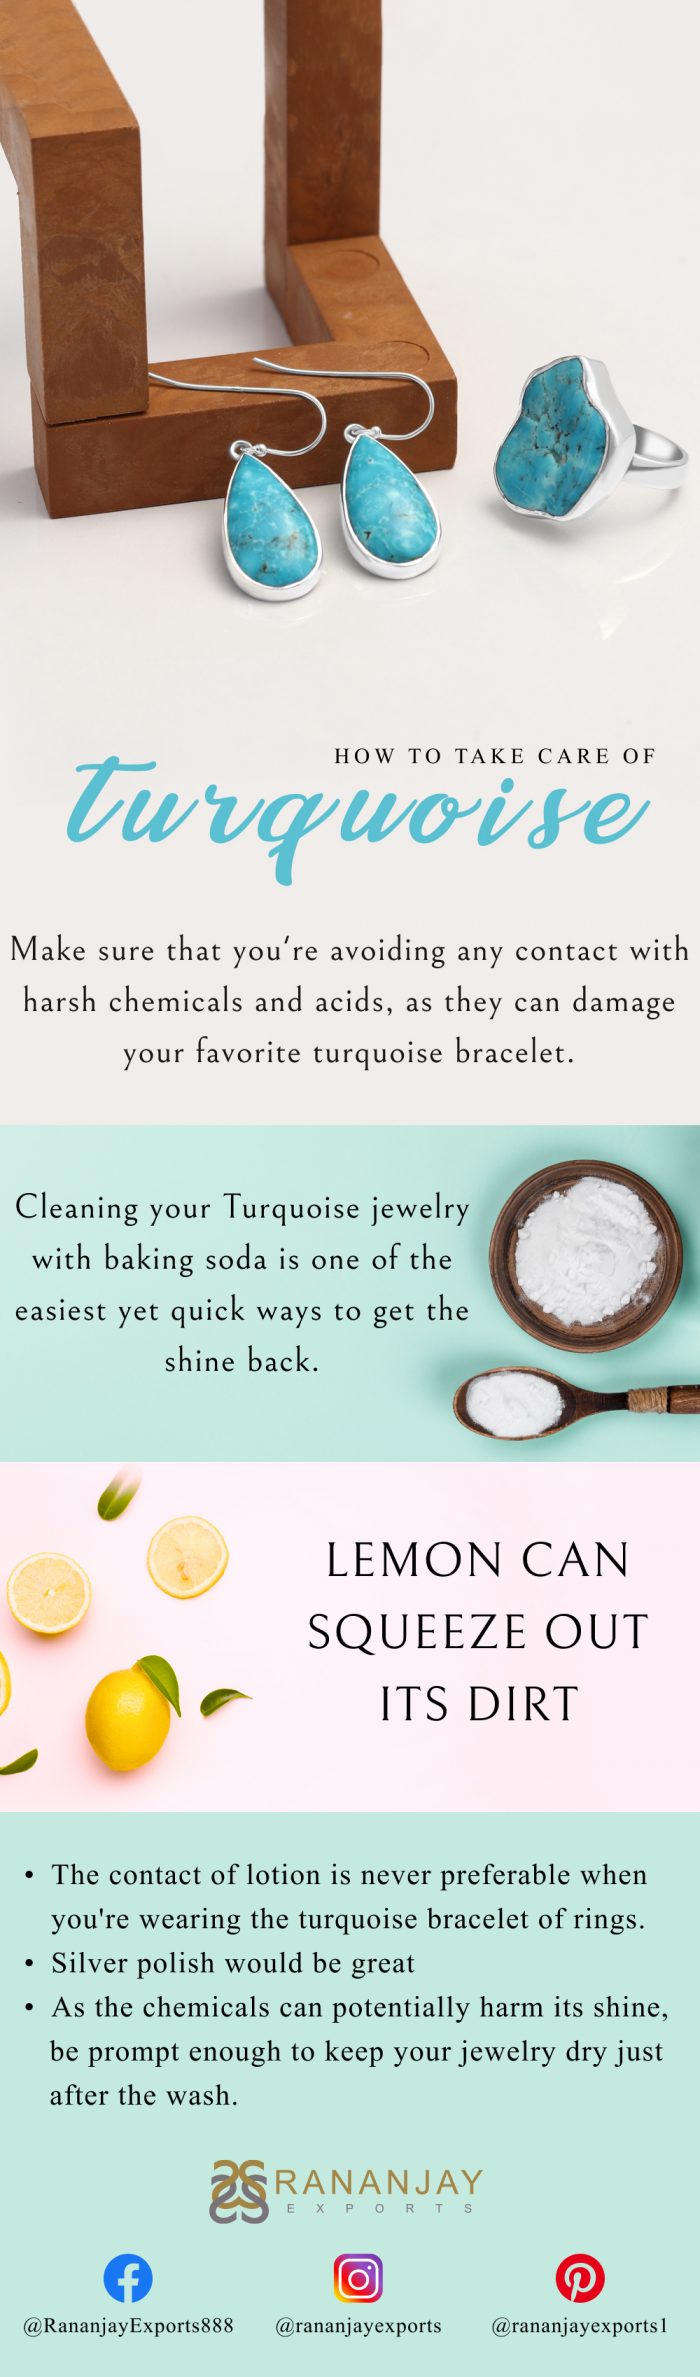 How To Take Care Of Your Turquoise Jewelry